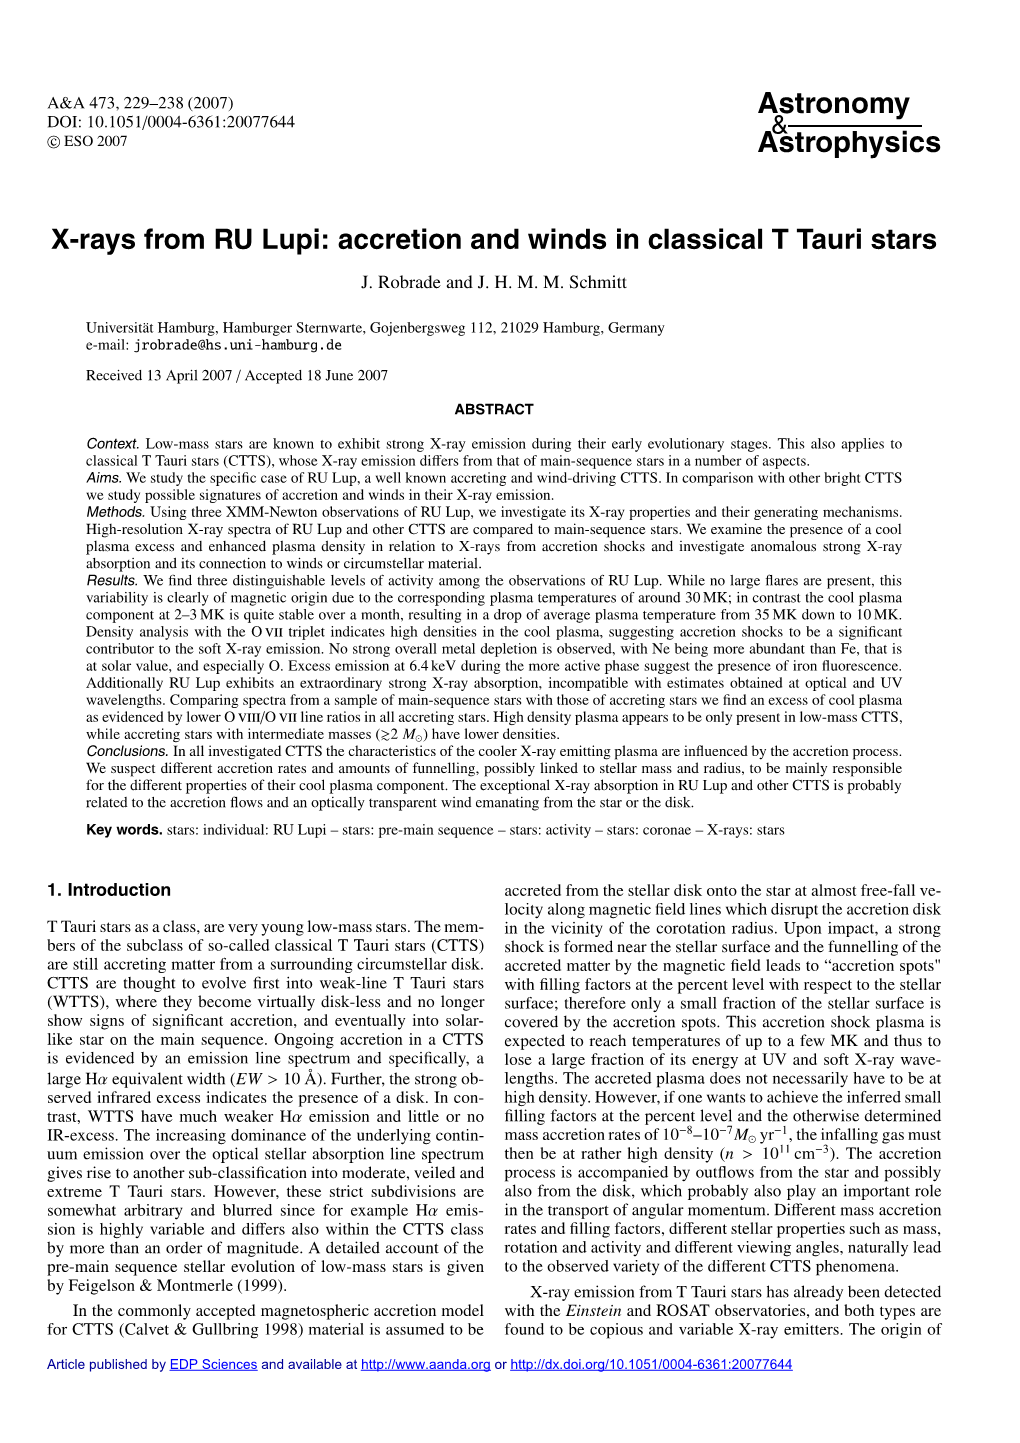 X-Rays from RU Lupi: Accretion and Winds in Classical T Tauri Stars